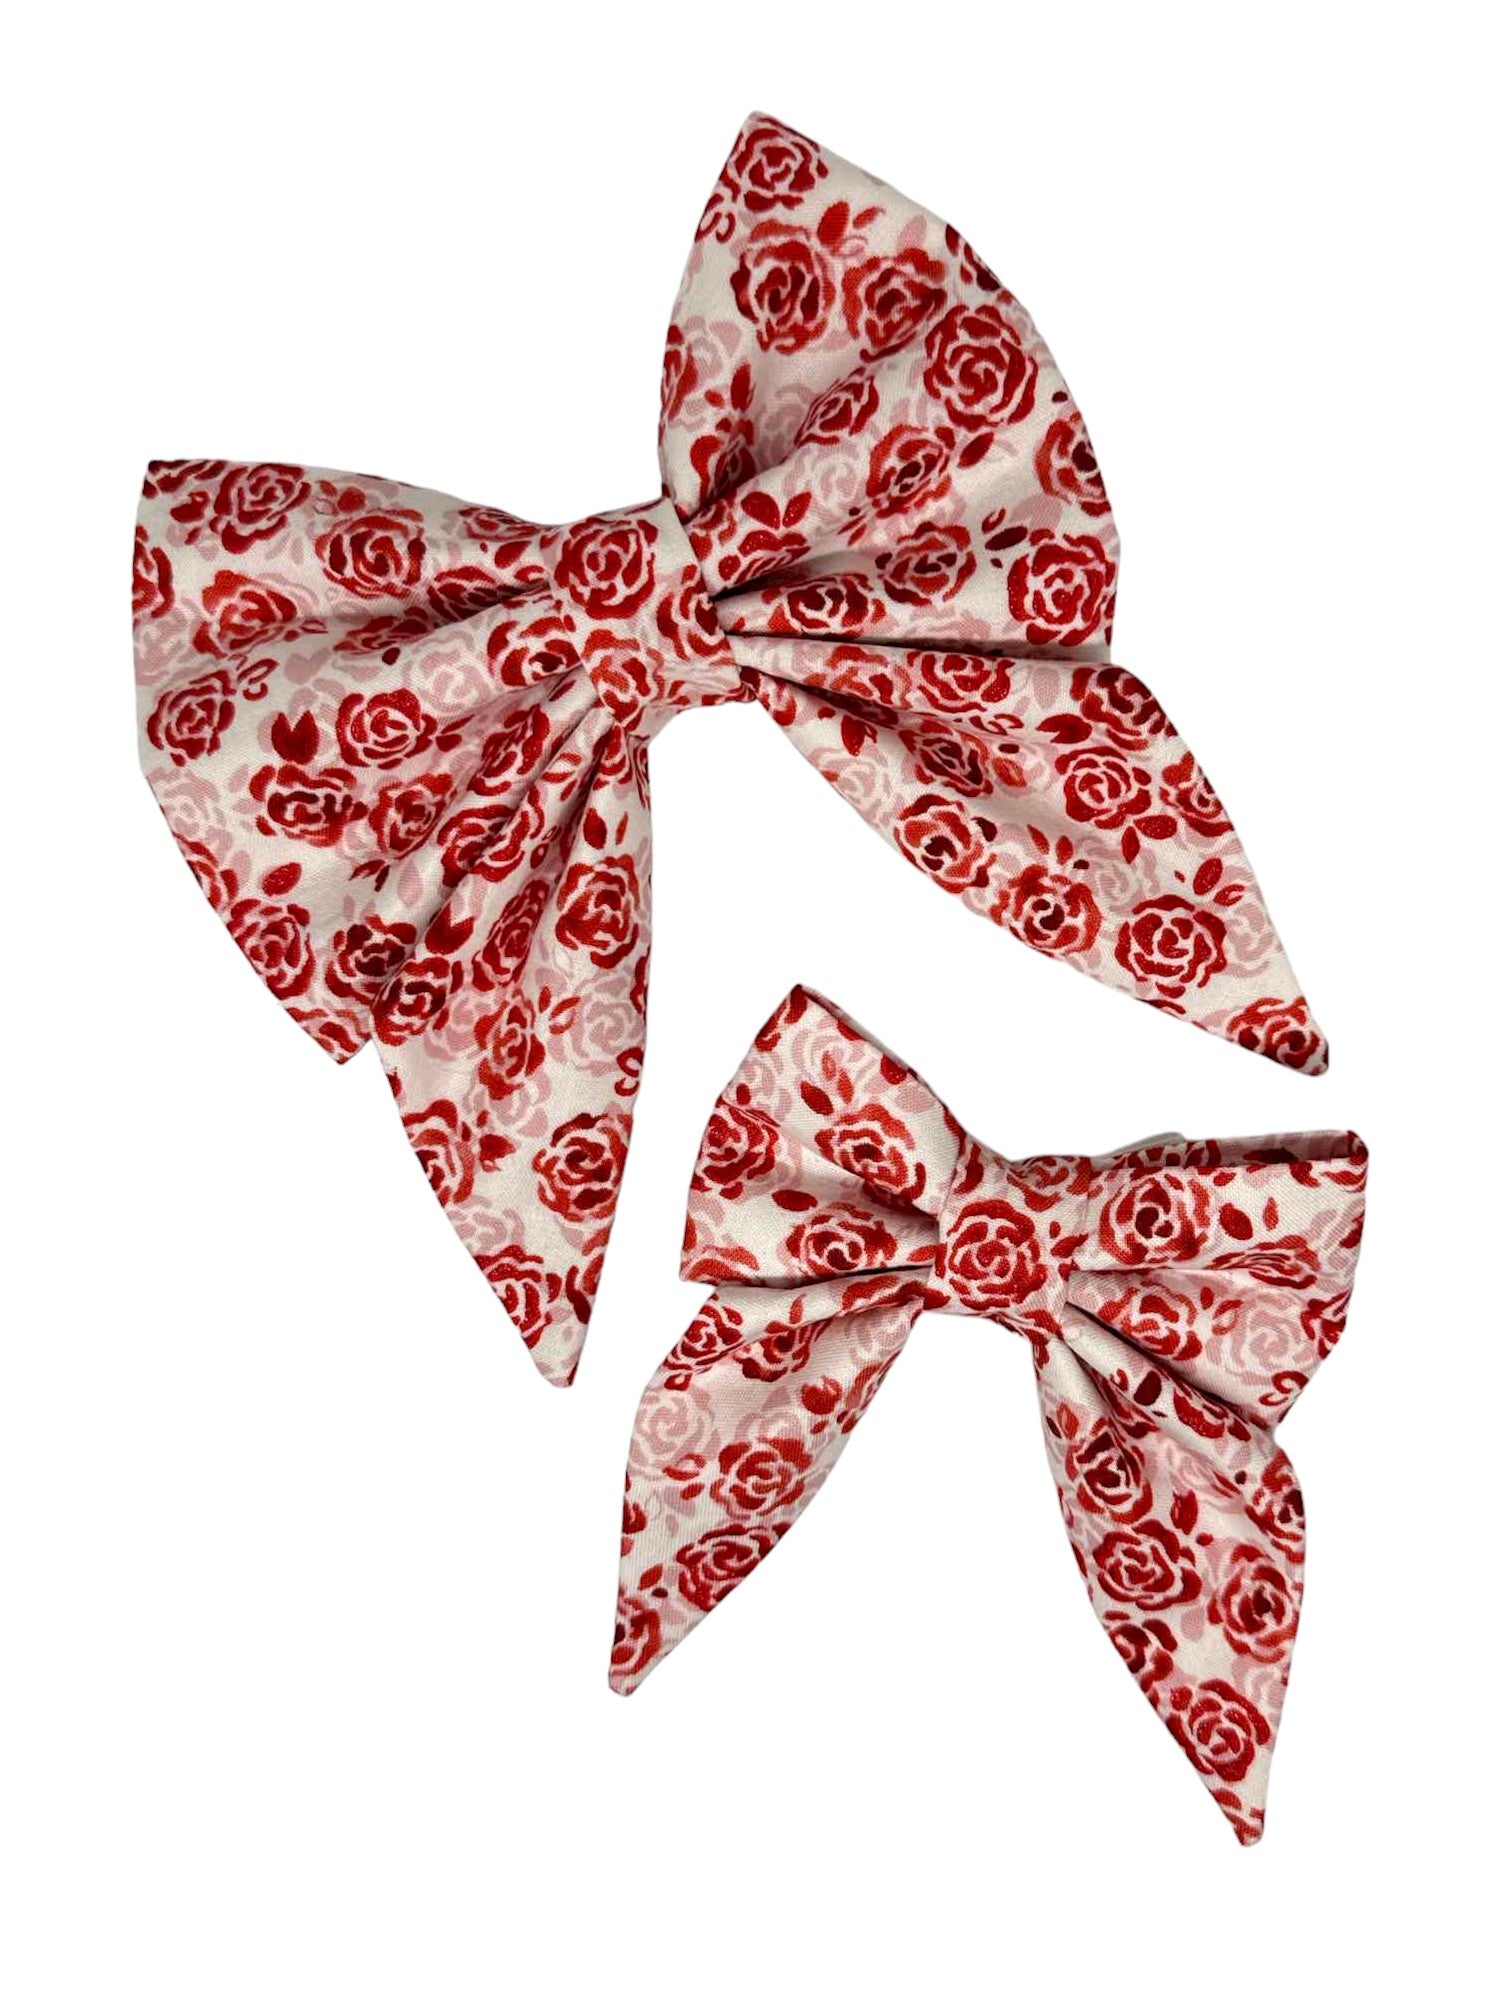 Red Rose Calico Dog Bow with Sparkles, Small-Medium and Medium-Large